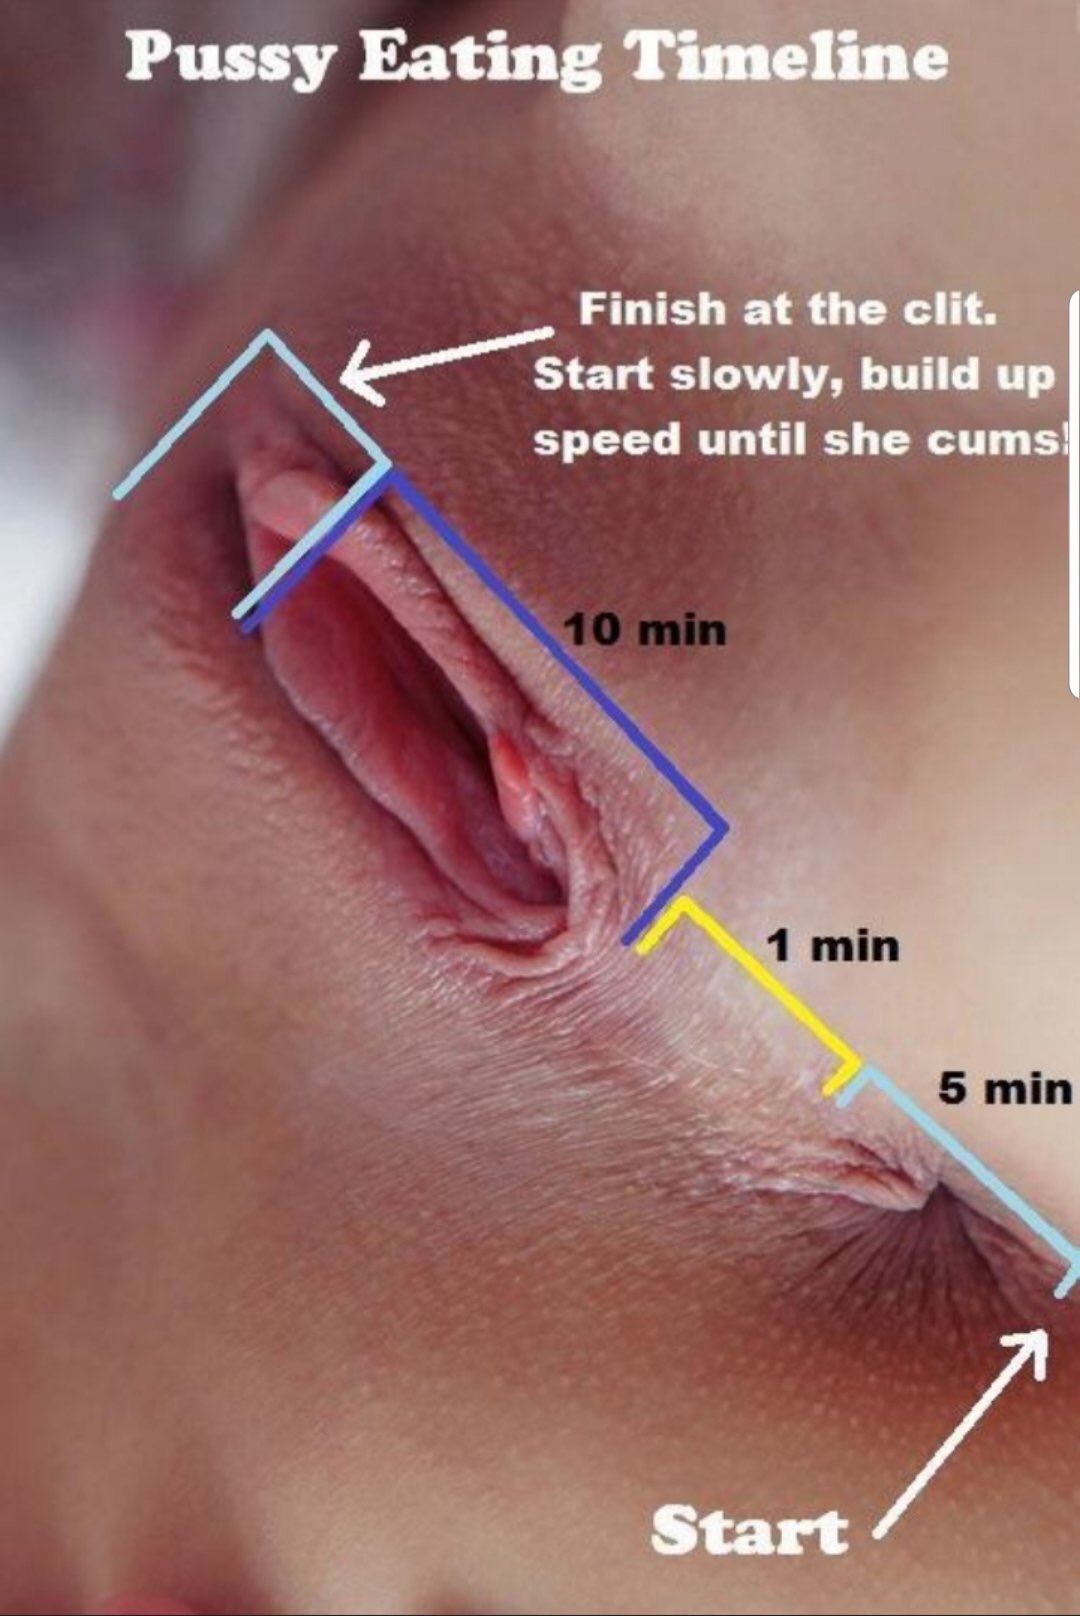 Emilia 👸💓 on X: Pussy Eating Timeline 🤣🤗 Guide for my girls 💕♥️ #pussy  #nsfw #lesbian #sexy t.coRfuPYzsDB2  X